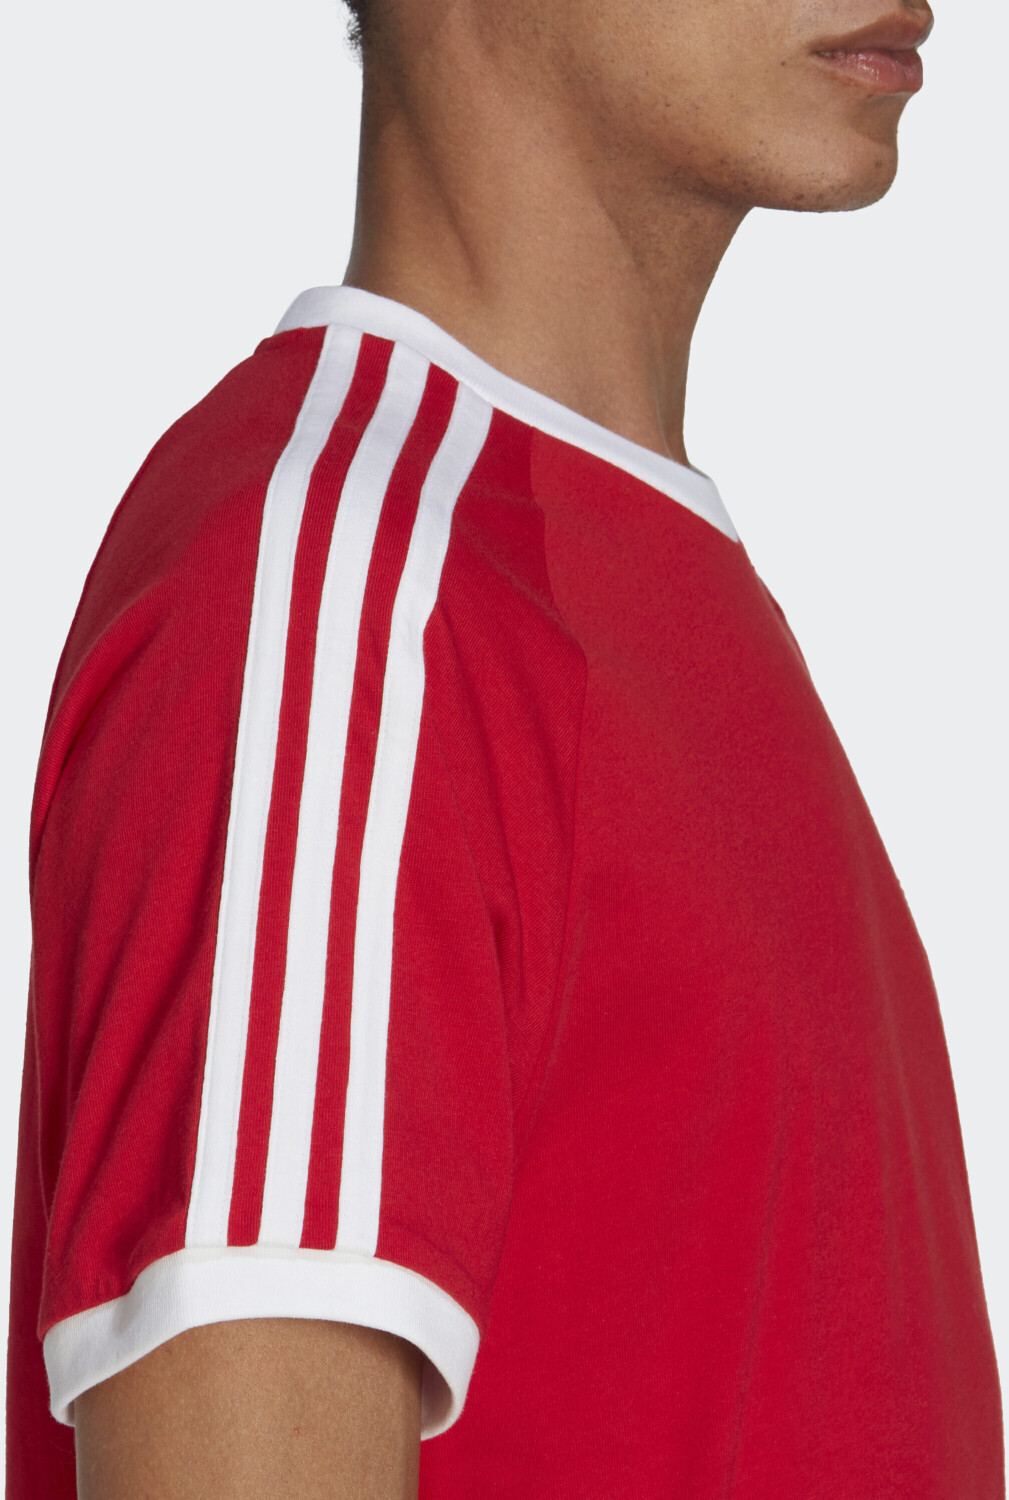 Buy Adidas from Adicolor Deals Best on (IA4852) scarlet £27.99 (Today) Classics T-Shirt – 3-Stripes better